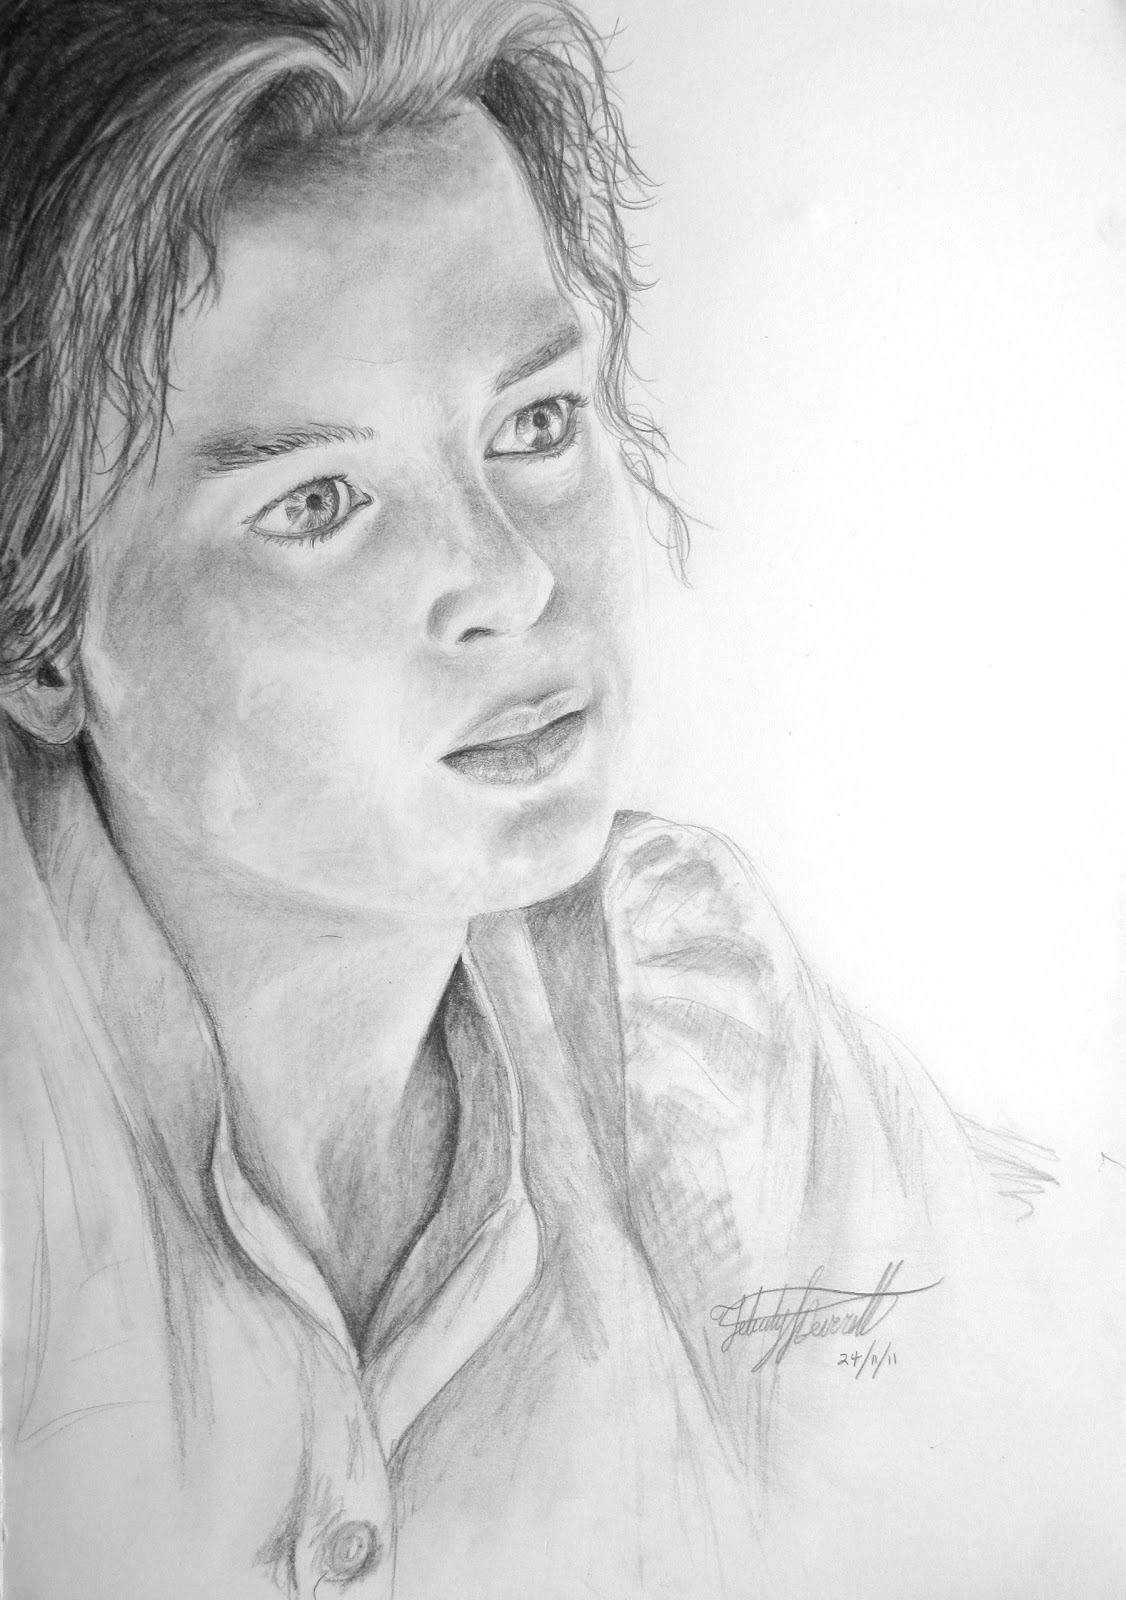 ... from that movie. Drawn with graphite pencils on A3 cartridge paper